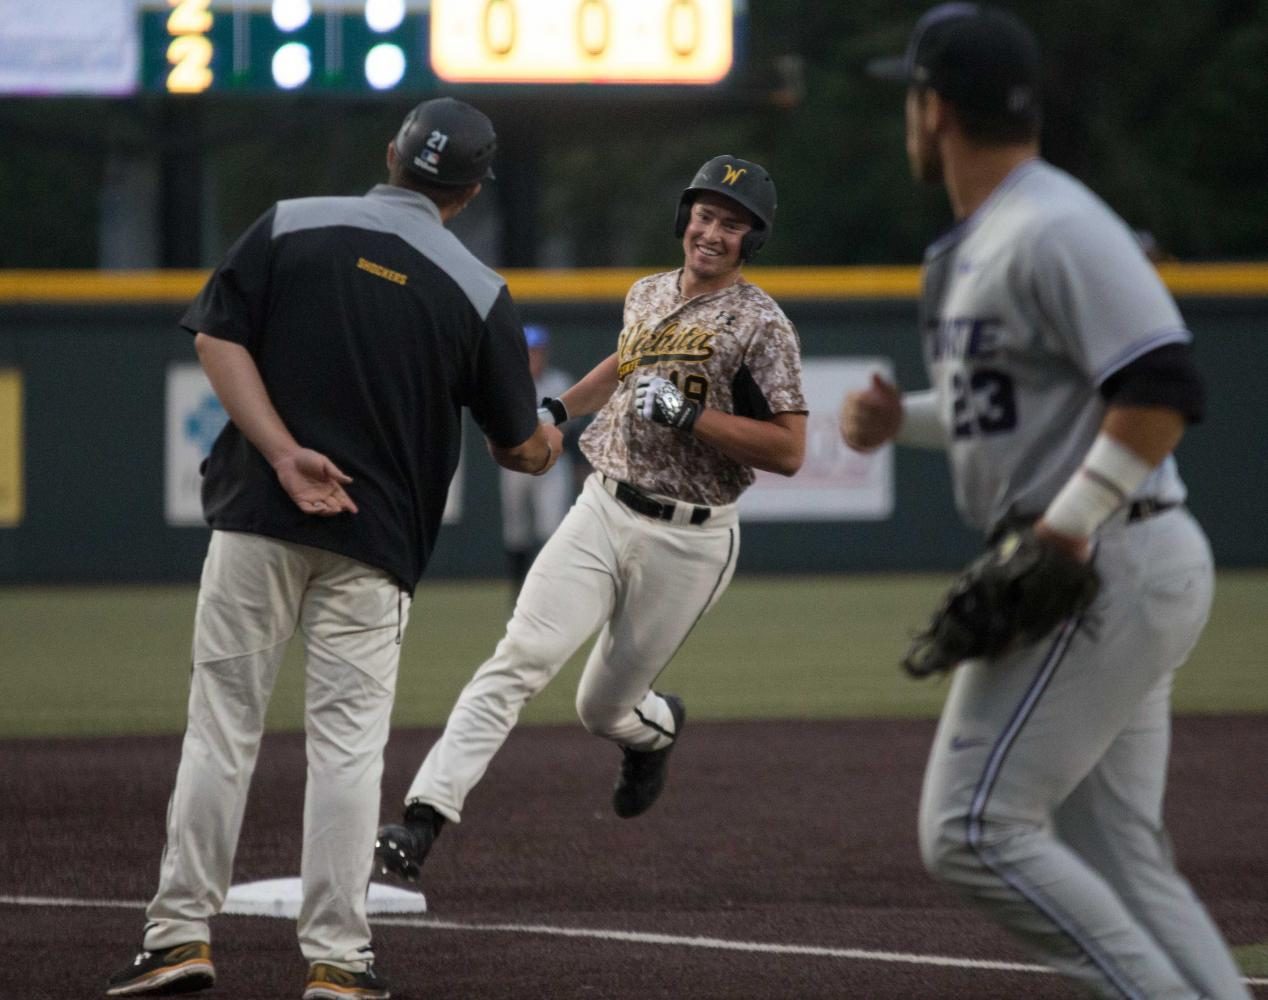 Wichita+State+sophomore+Luke+Ritter+smiles+at+assistant+coach+Brian+Walker+after+hitting+a+walk-off+home+run+to+beat+K-State+3-2+Tuesday+evening+at+Eck+Stadium.